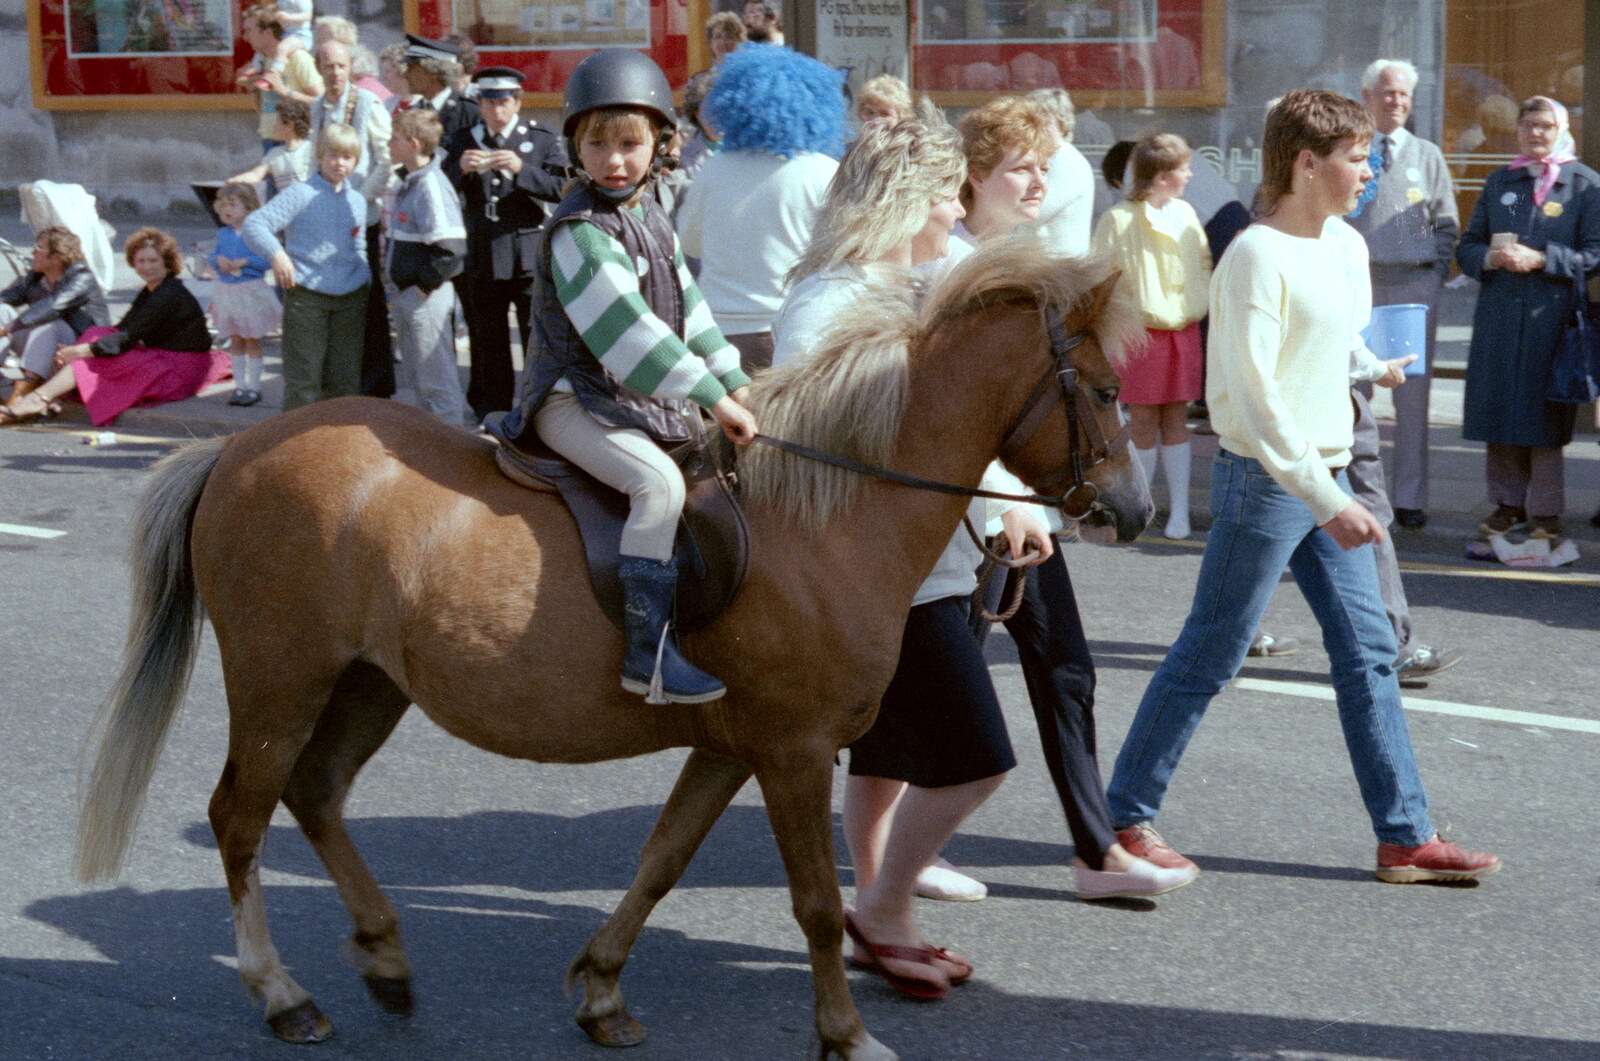 A small child on a small pony from Uni: The Lord Mayor's Procession, Plymouth, Devon - 21st May 1986